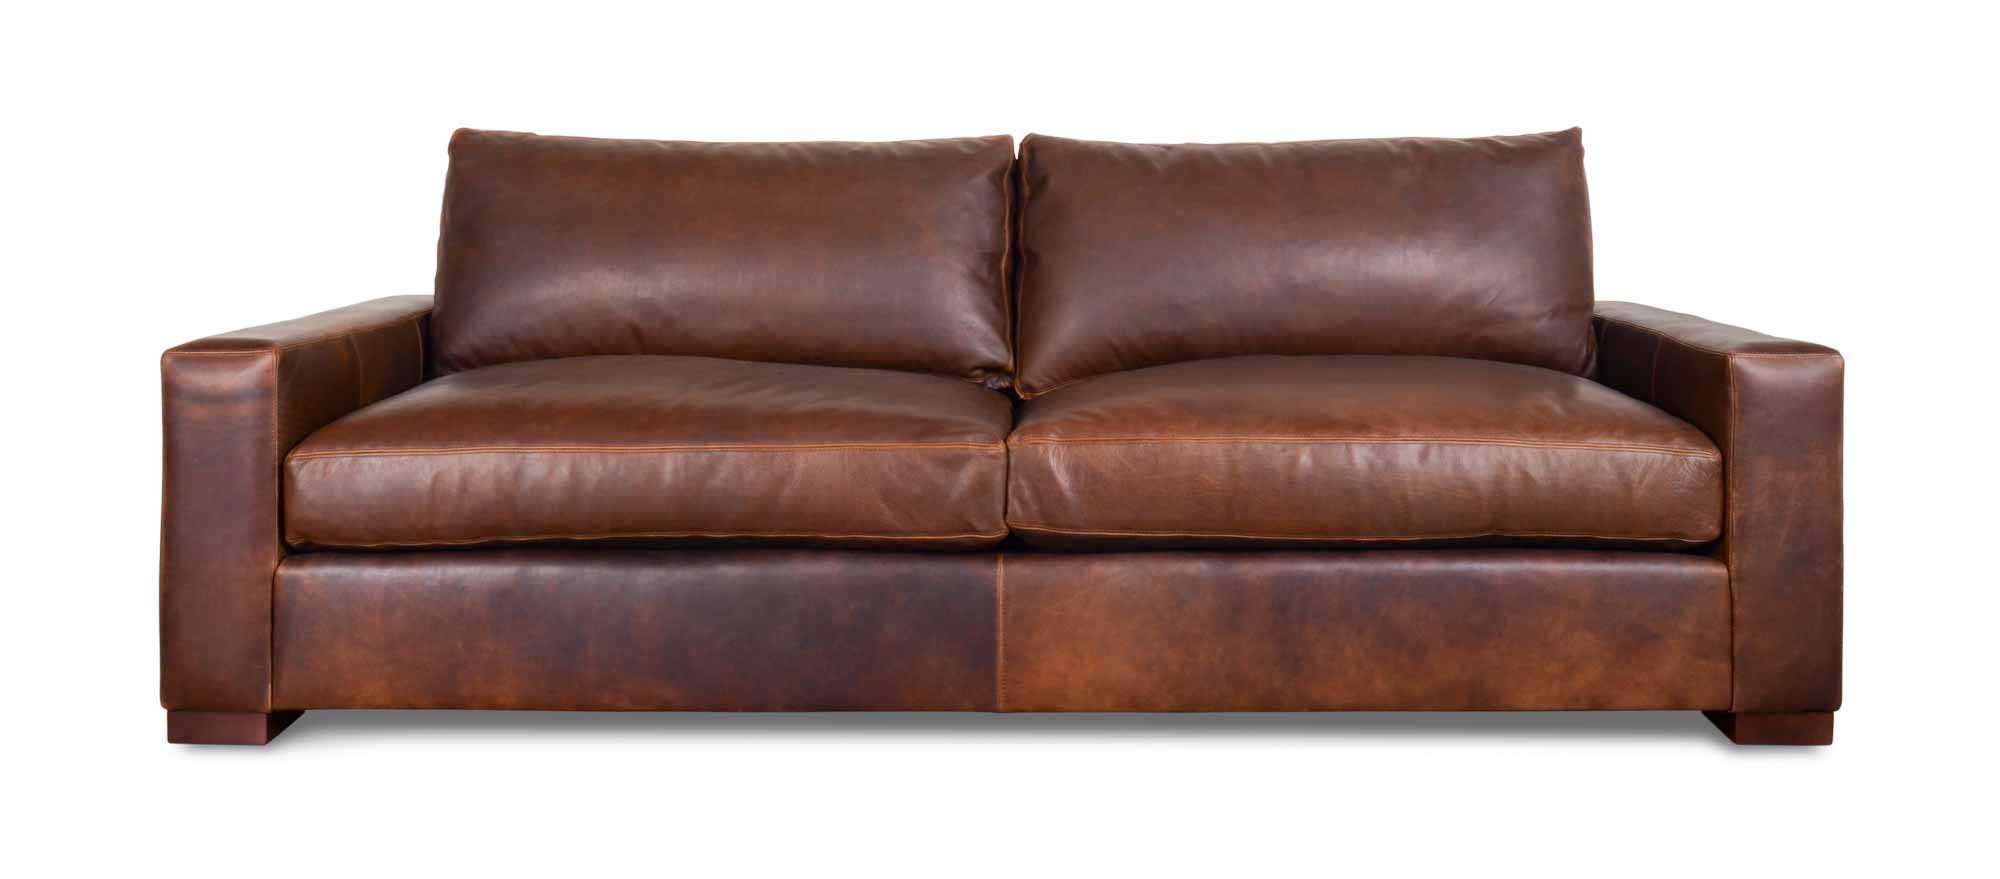 Cococohome Monroe Vs Rh Maxwell, Maxwell Leather Chair